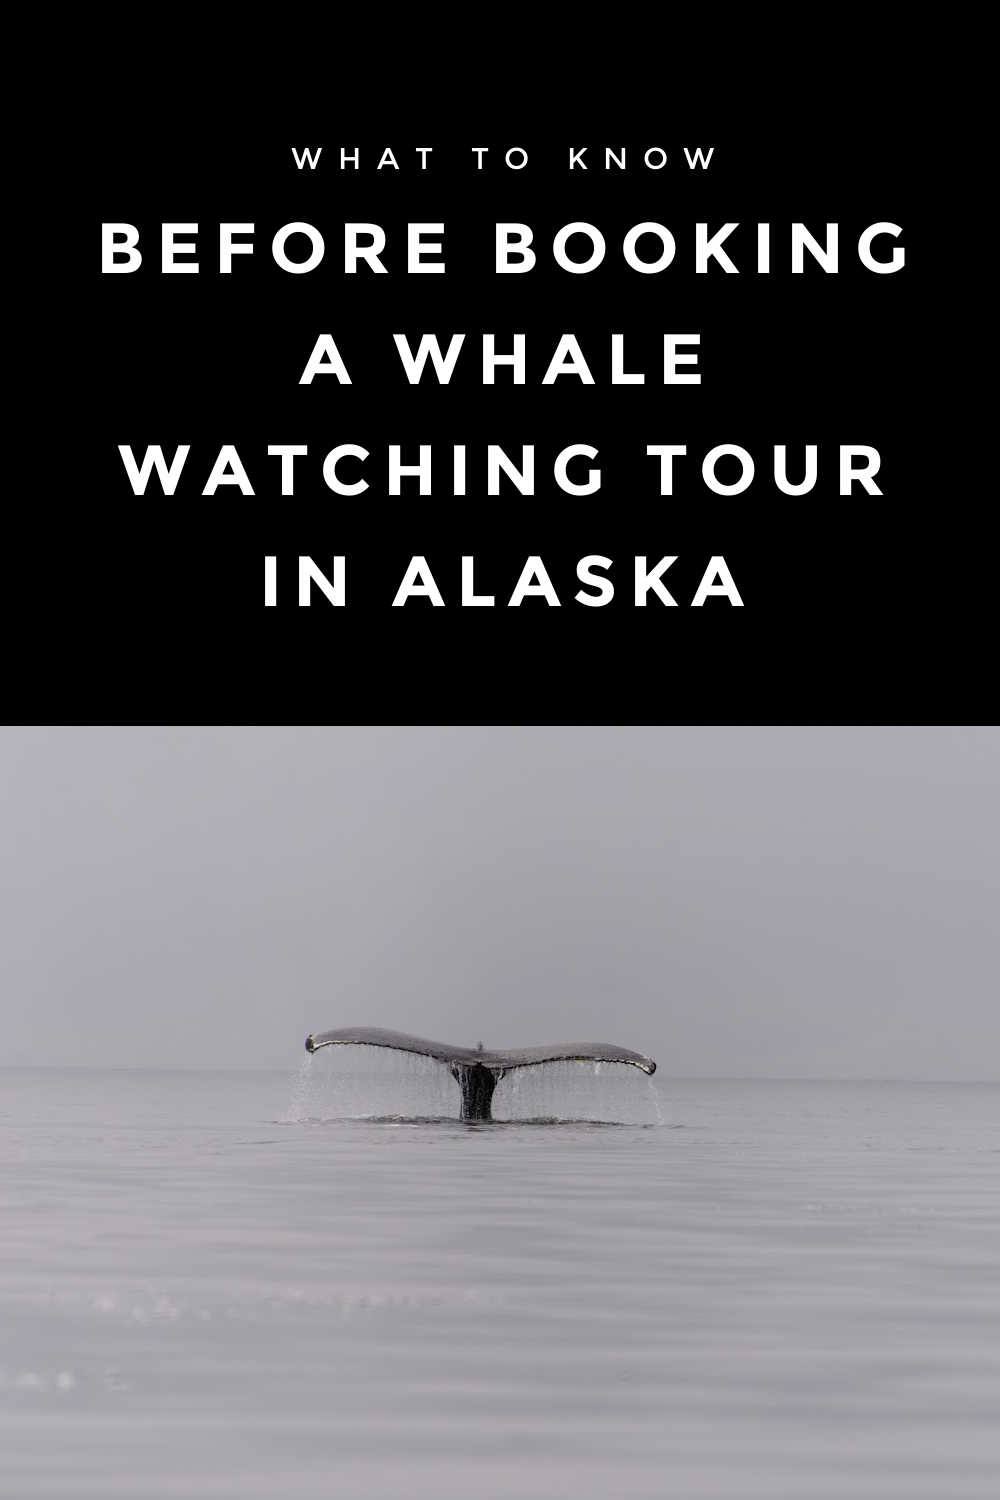 WHAT TO KNOW BEFORE BOOKING A WHALE WATCHING TOUR IN ALASKA